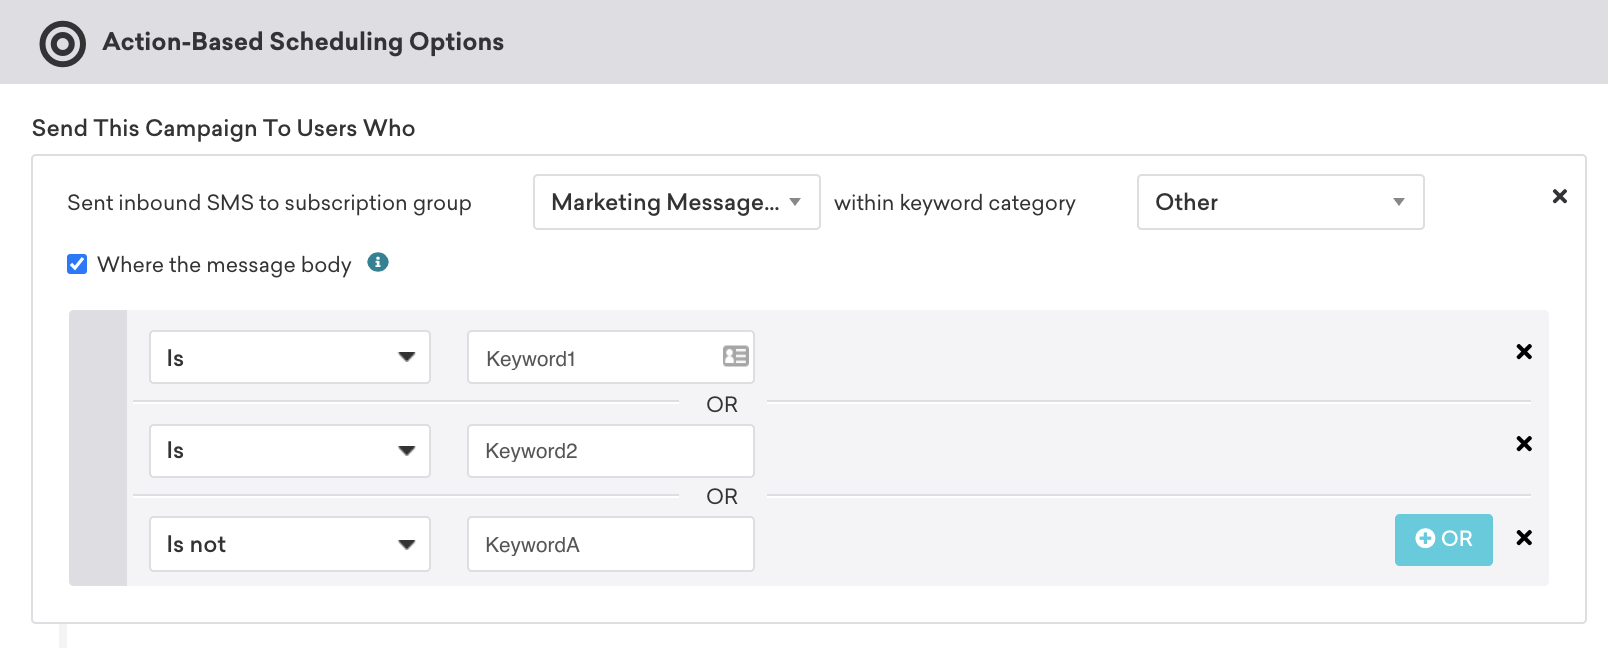 Action-based campaign with the trigger Send inbound SMS to subscription group "Marketing Message Service A" within keyword category "Other" where the message body is "Keyword1" or is "Keyword2" or is not "Keyword A".